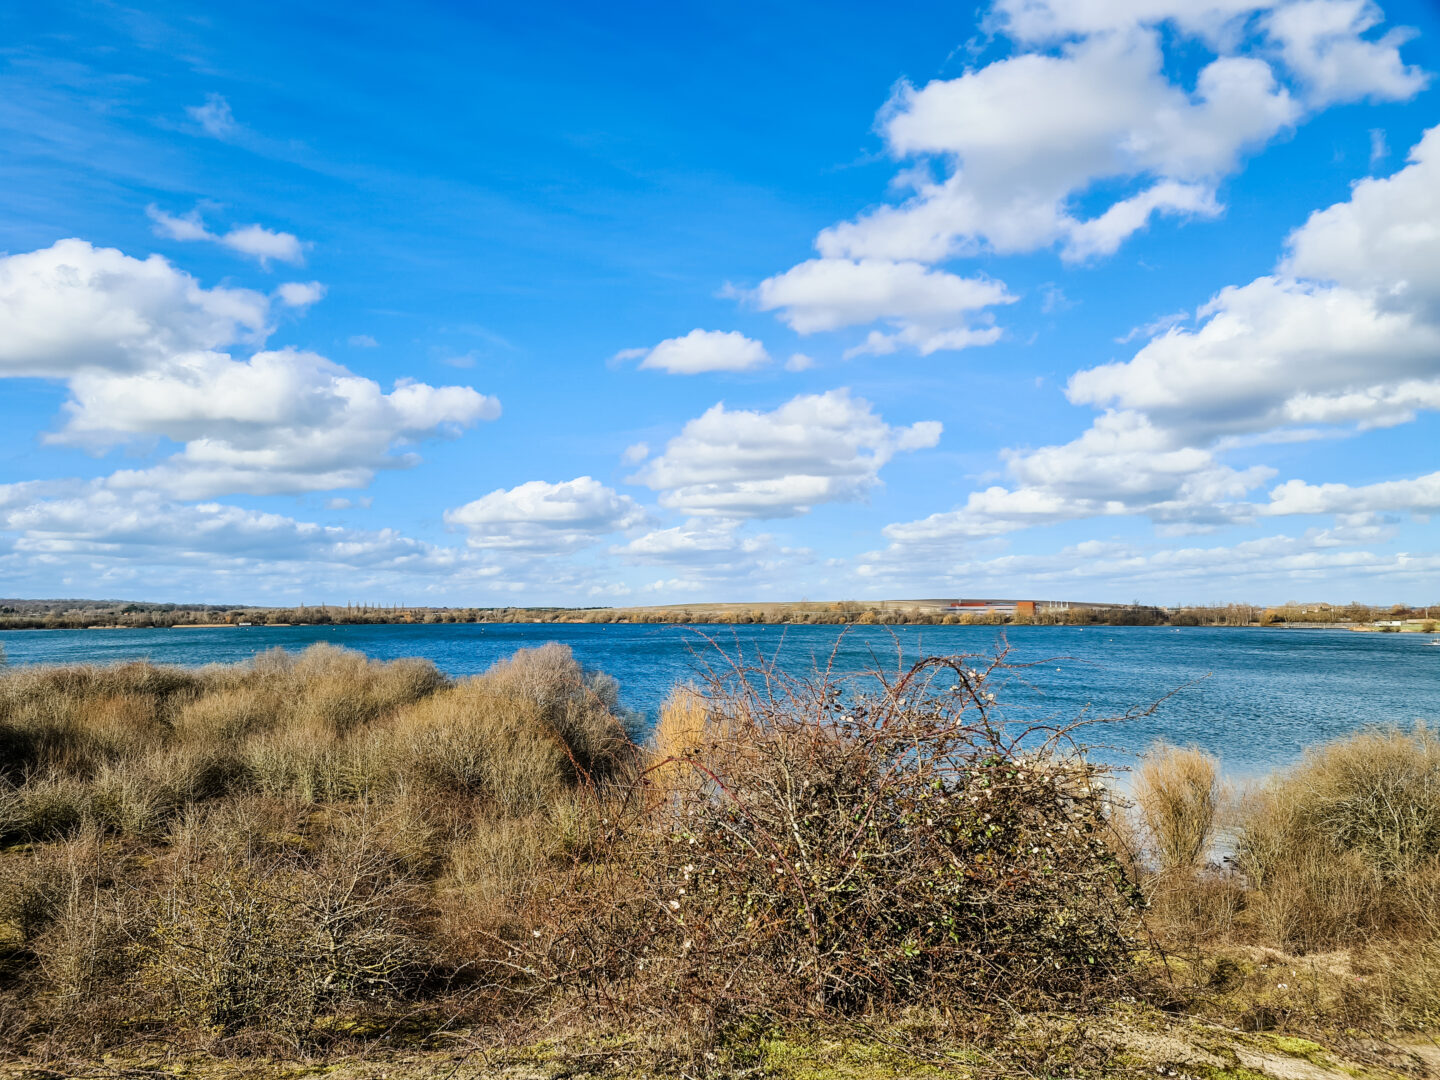 landscape of a lake, with brown shrubs in the foreground and a bright blue sky with white clouds